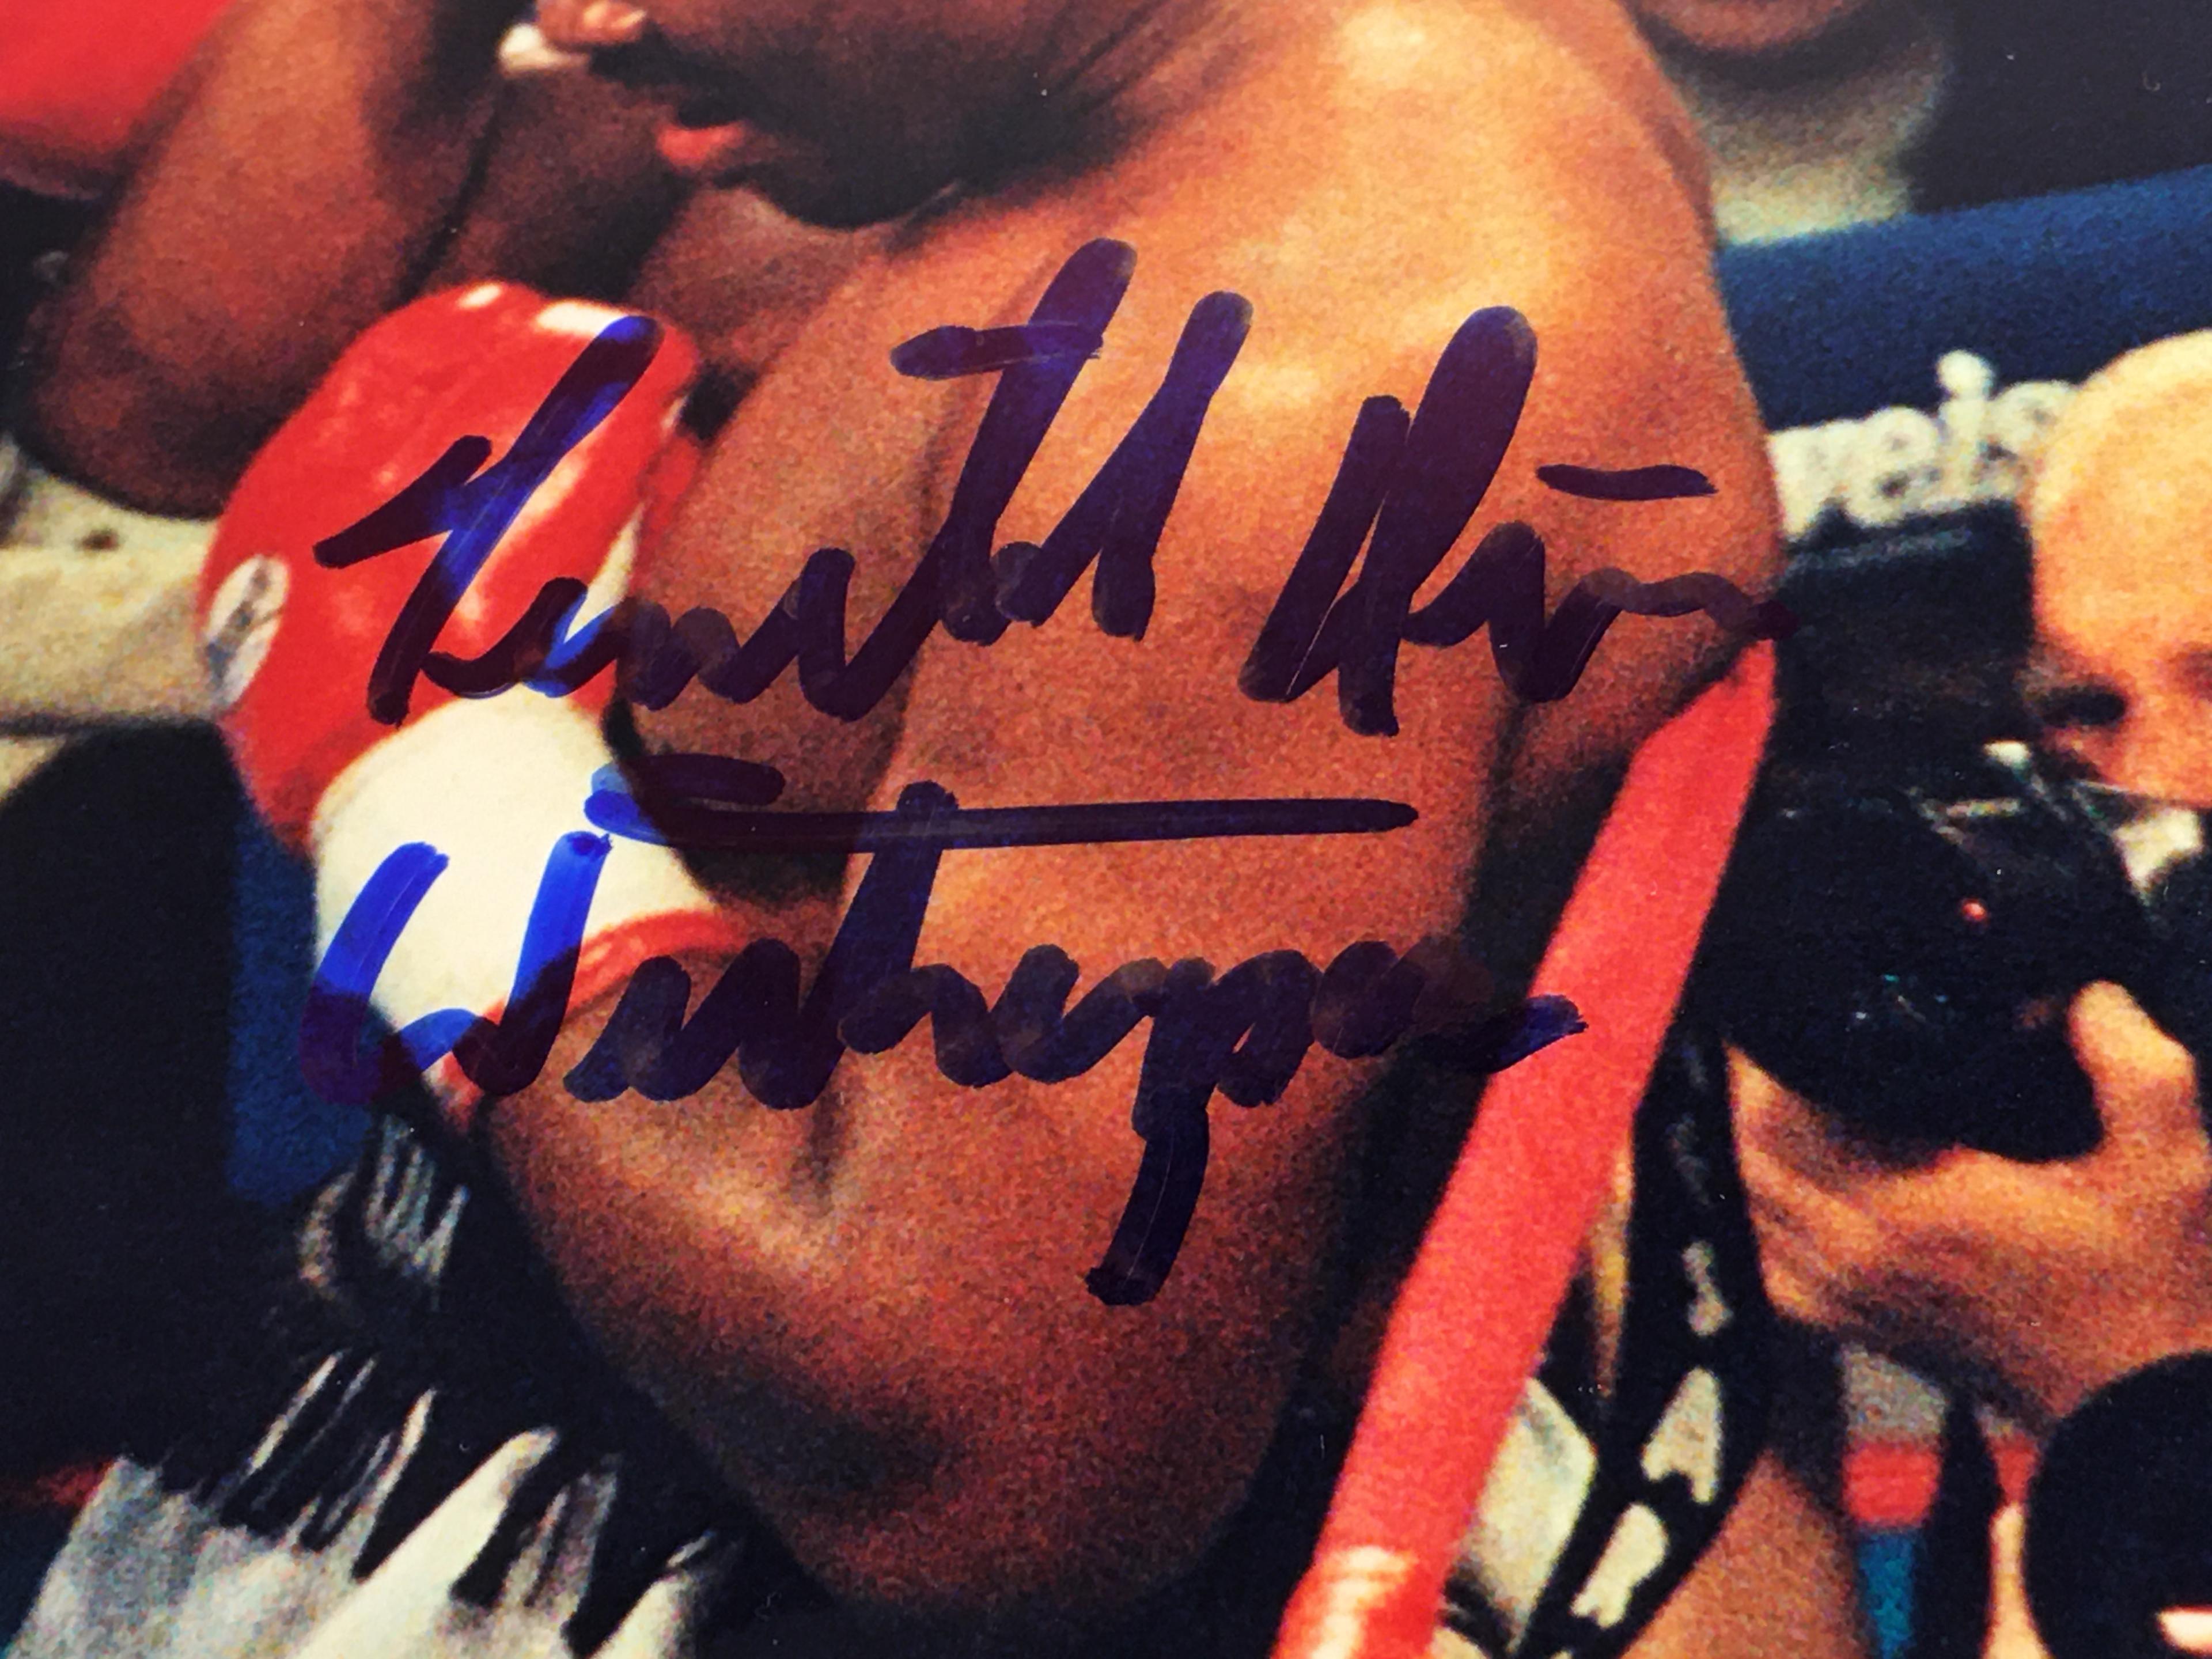 Collector Sport Boxing Photo Signed by Ray Mercer & Tim Witherspoon 8X10" w/ COA